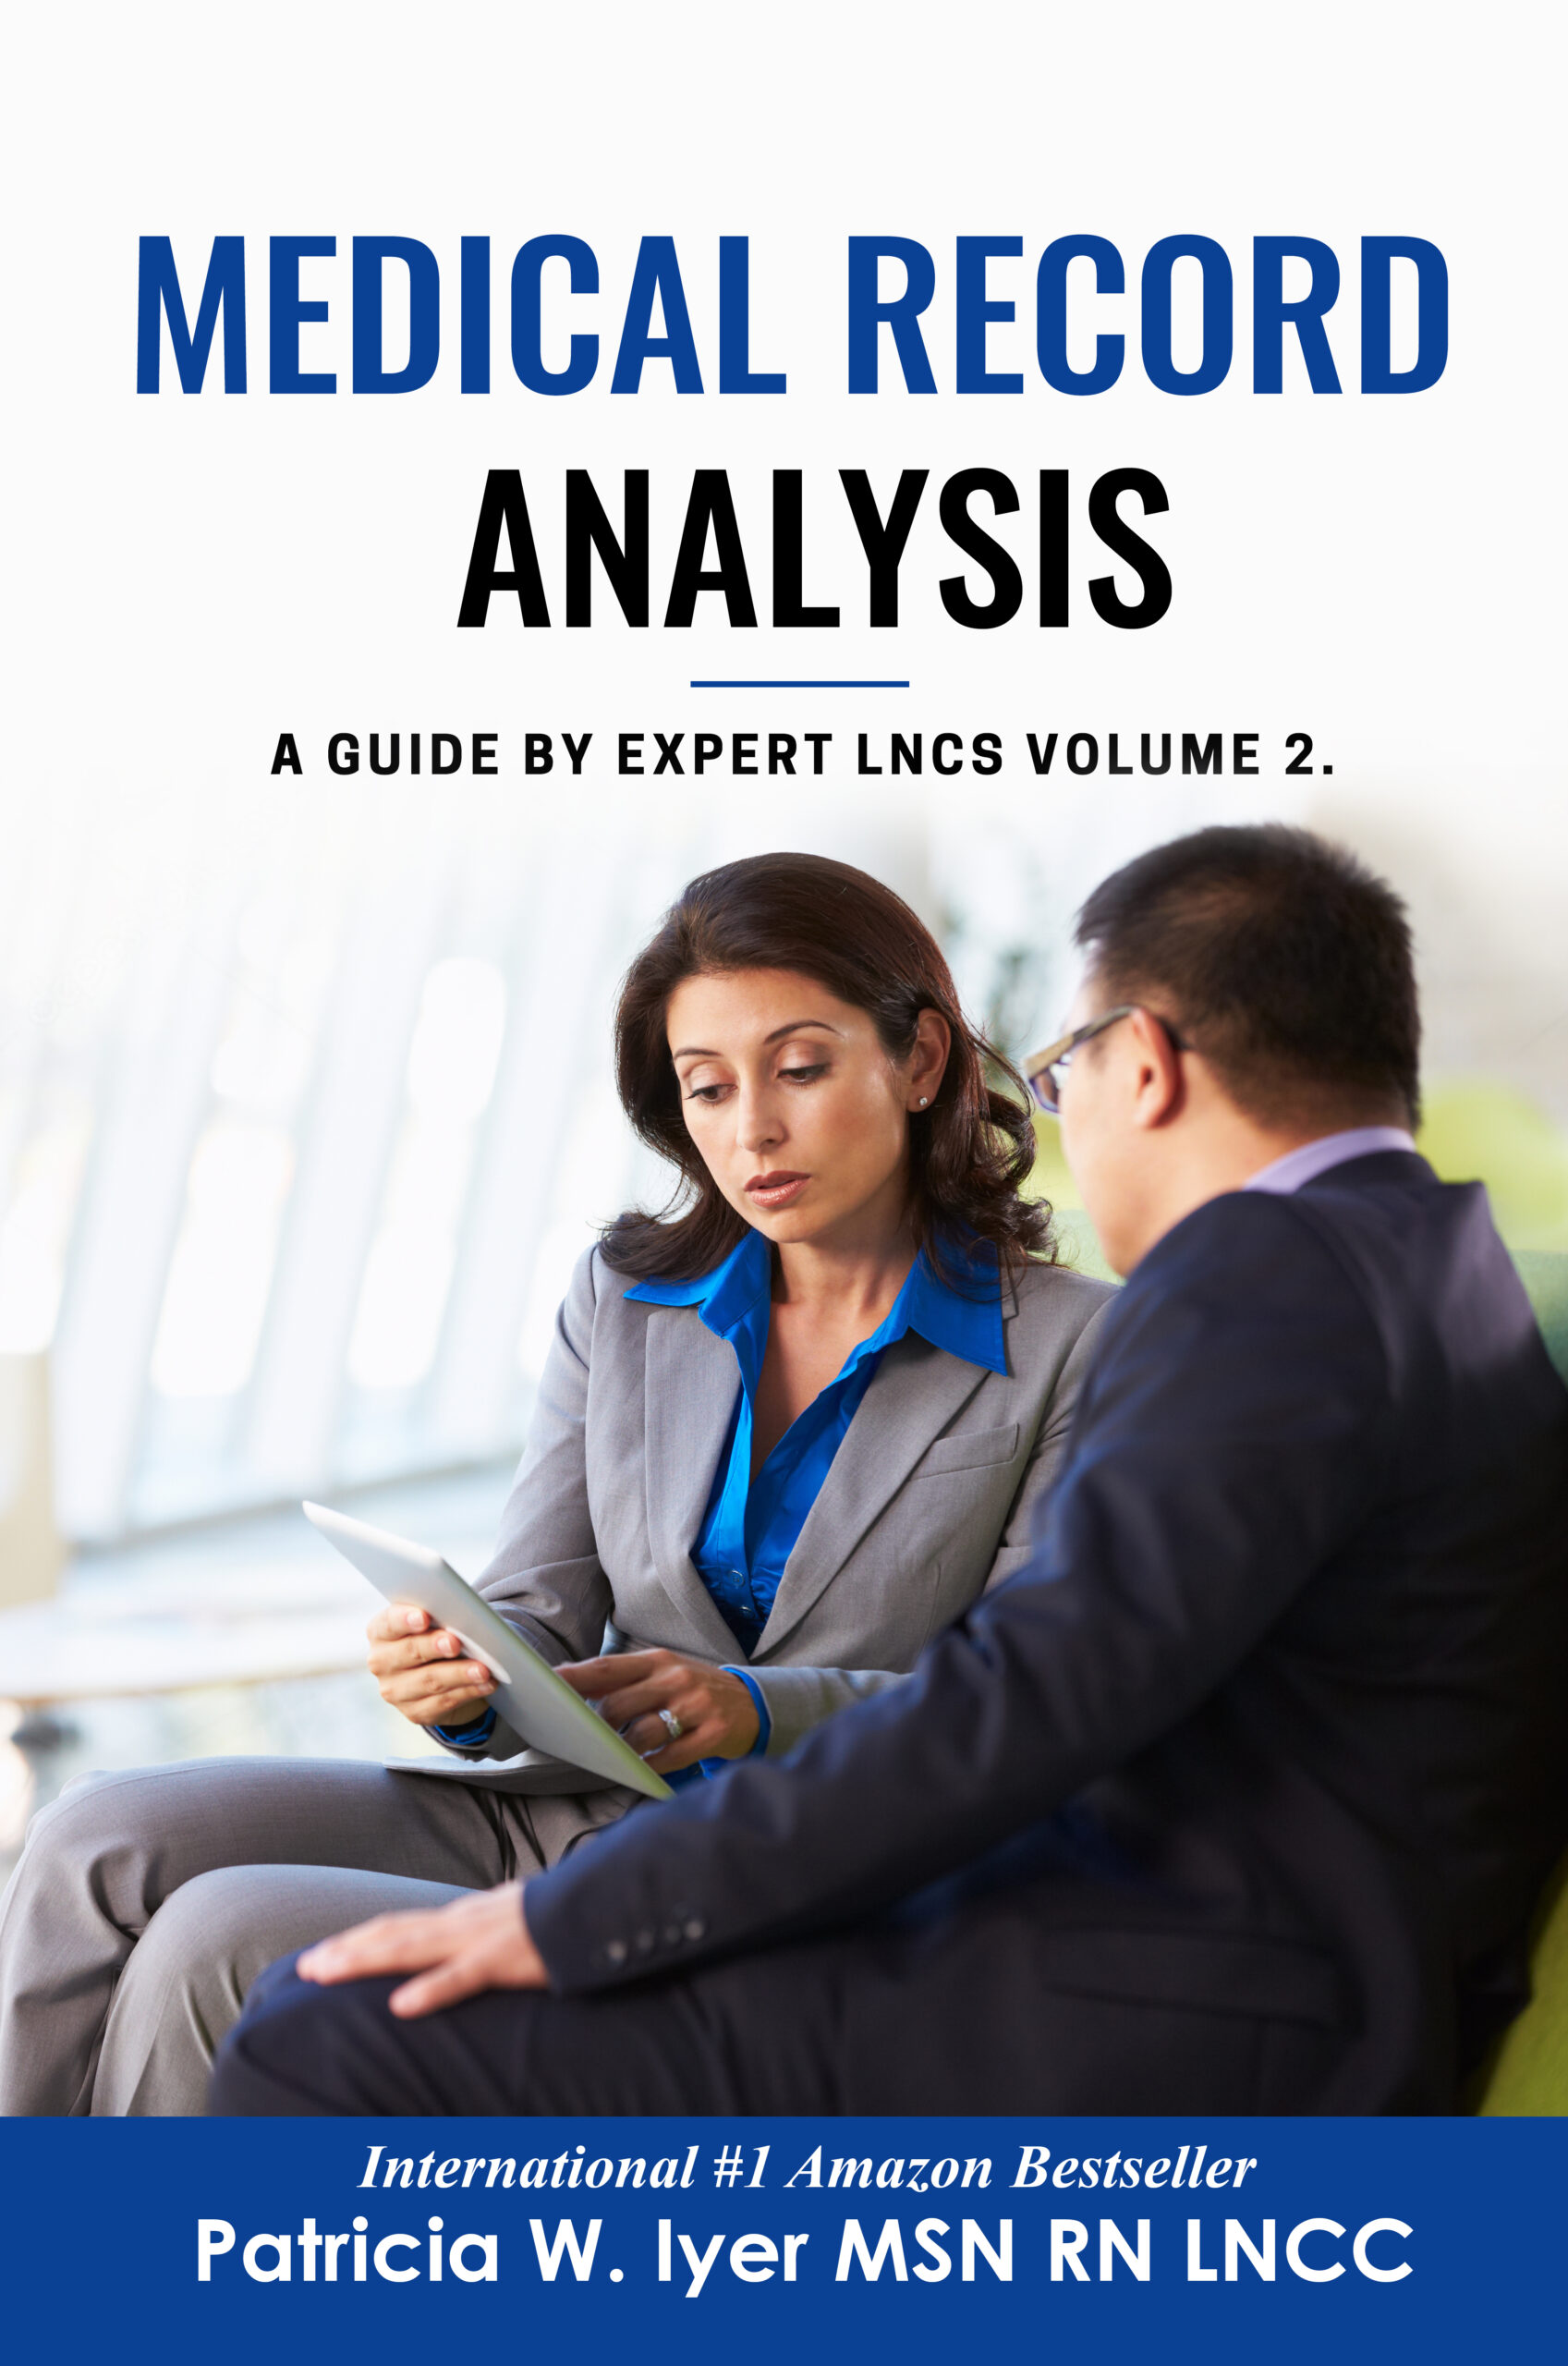 Medical Record Analysis - A Guide by Expert LNCs